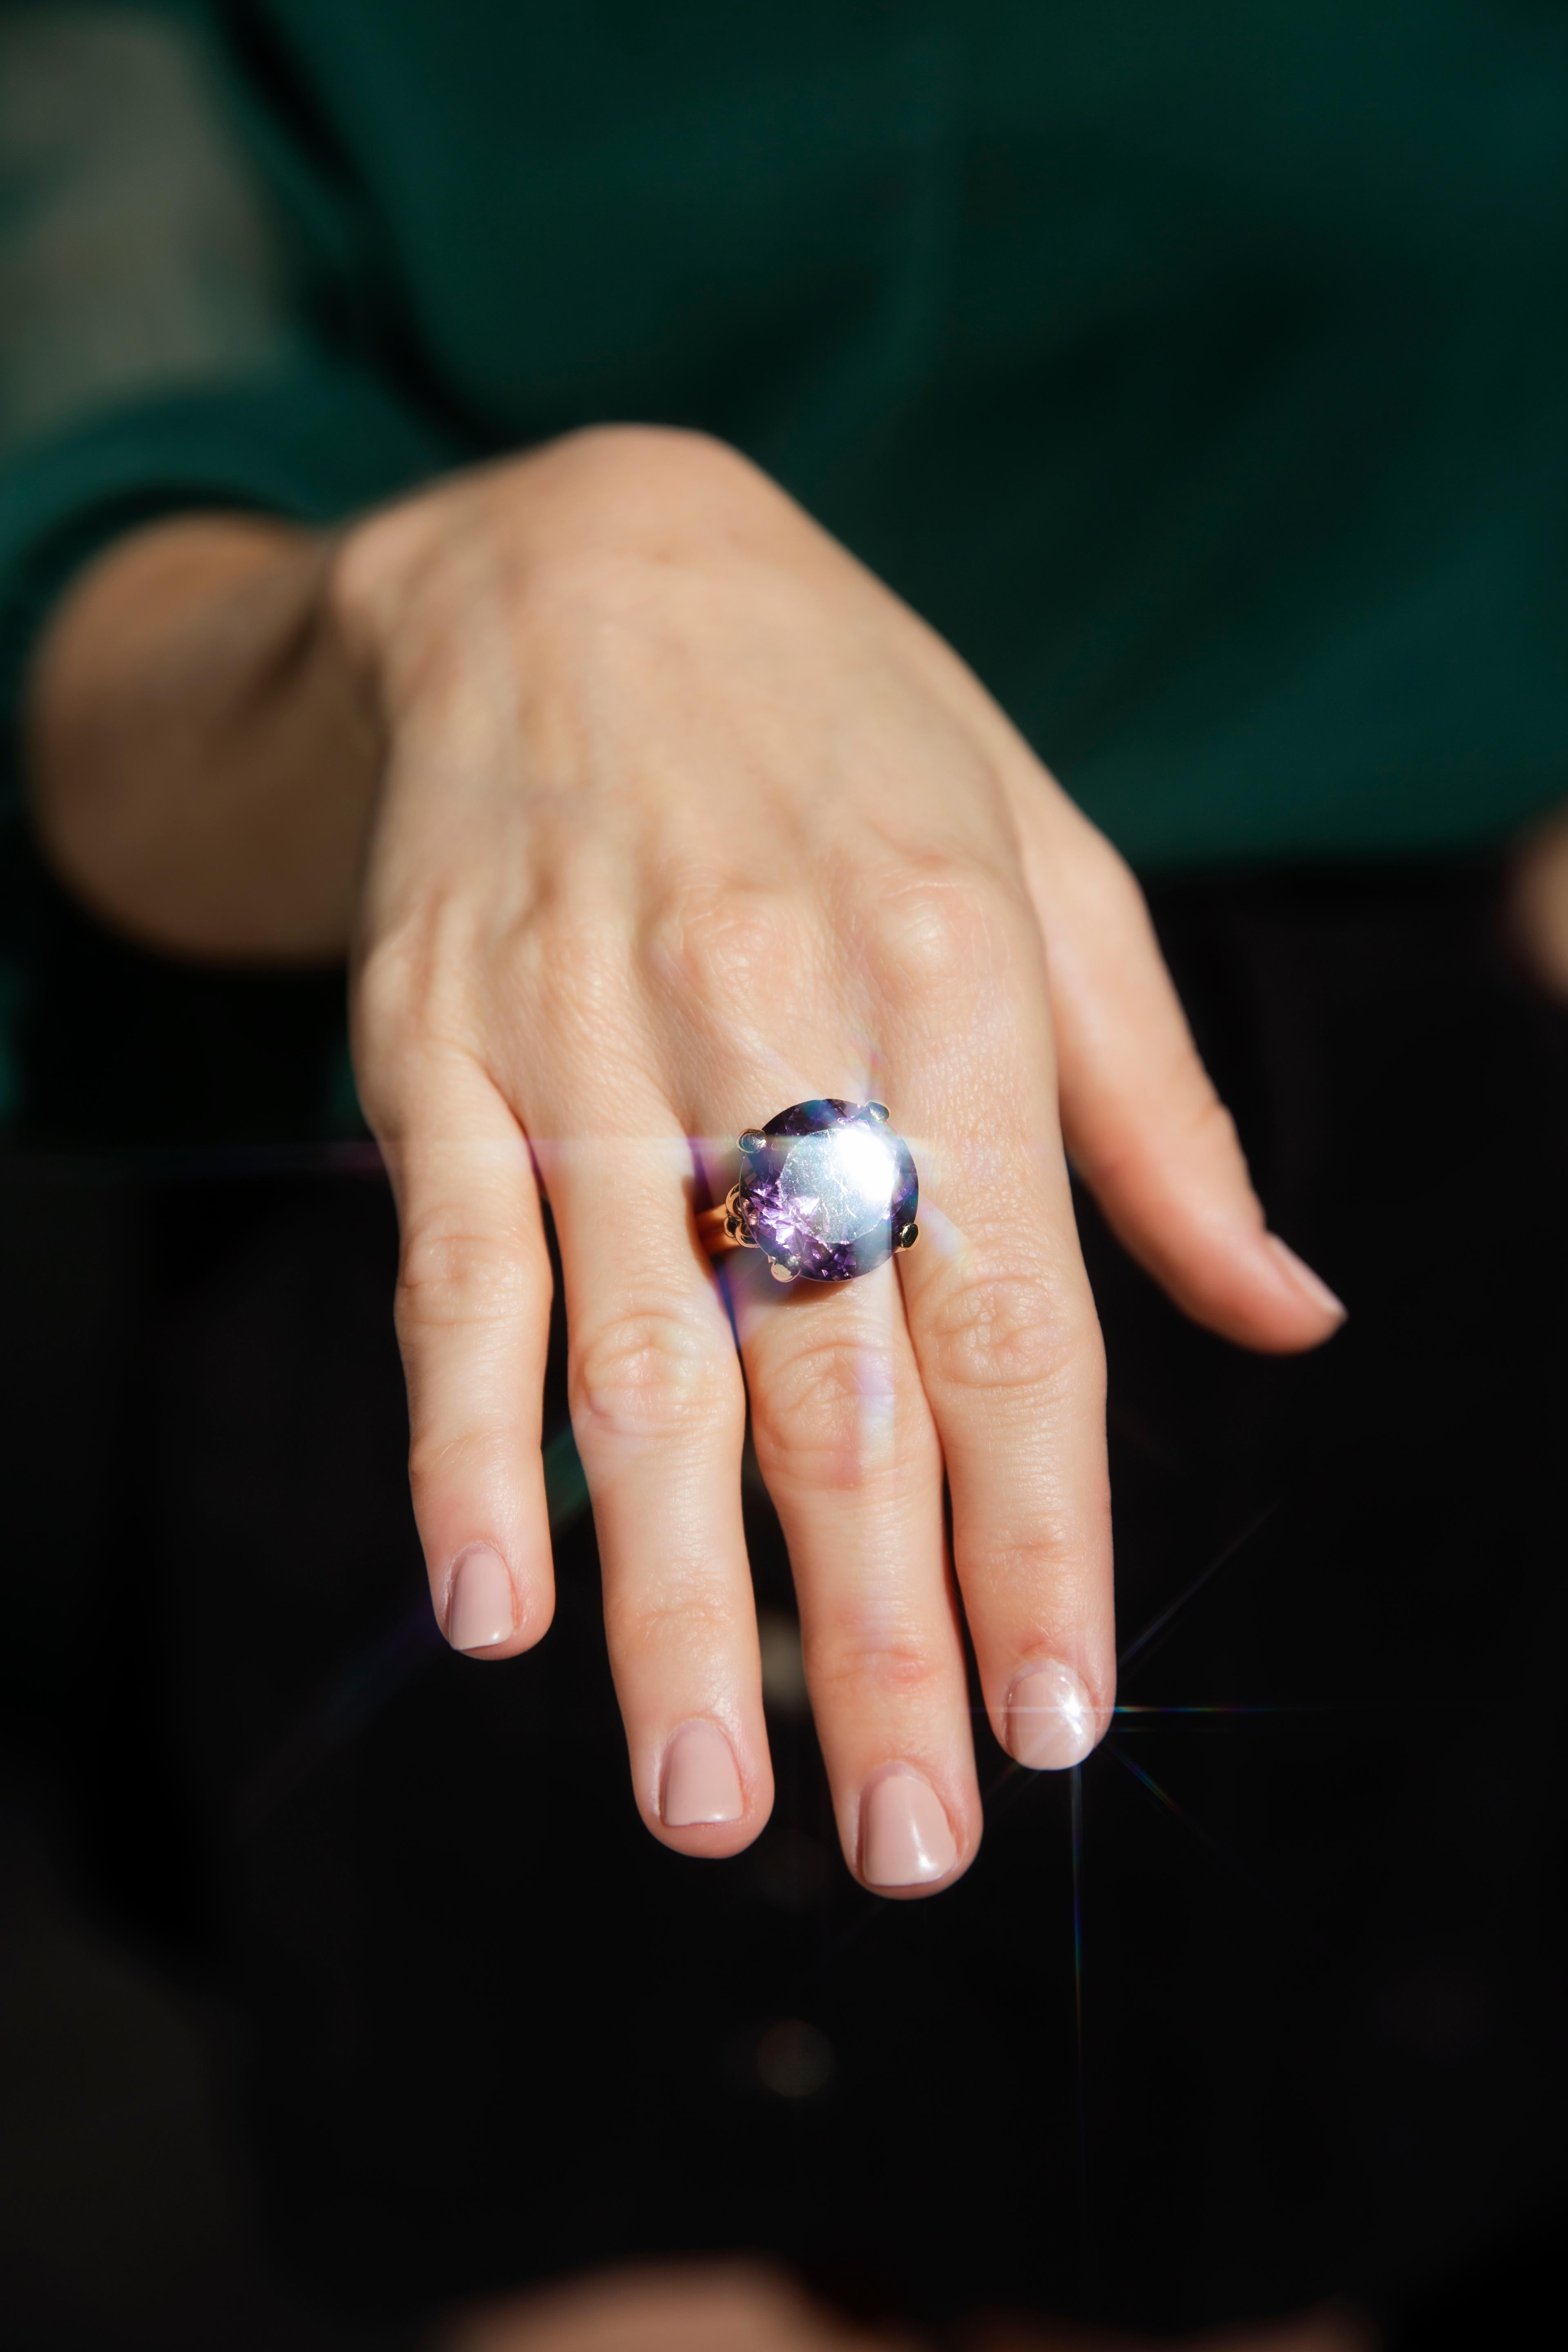 Forged in 14 carat yellow gold, this lovely 1970s vintage ring features an opulent 15 carat faceted round bright purple amethyst in a claw setting. This lovely vintage piece has been named The Bertie Ring. Her delightful amethyst is a true darling,